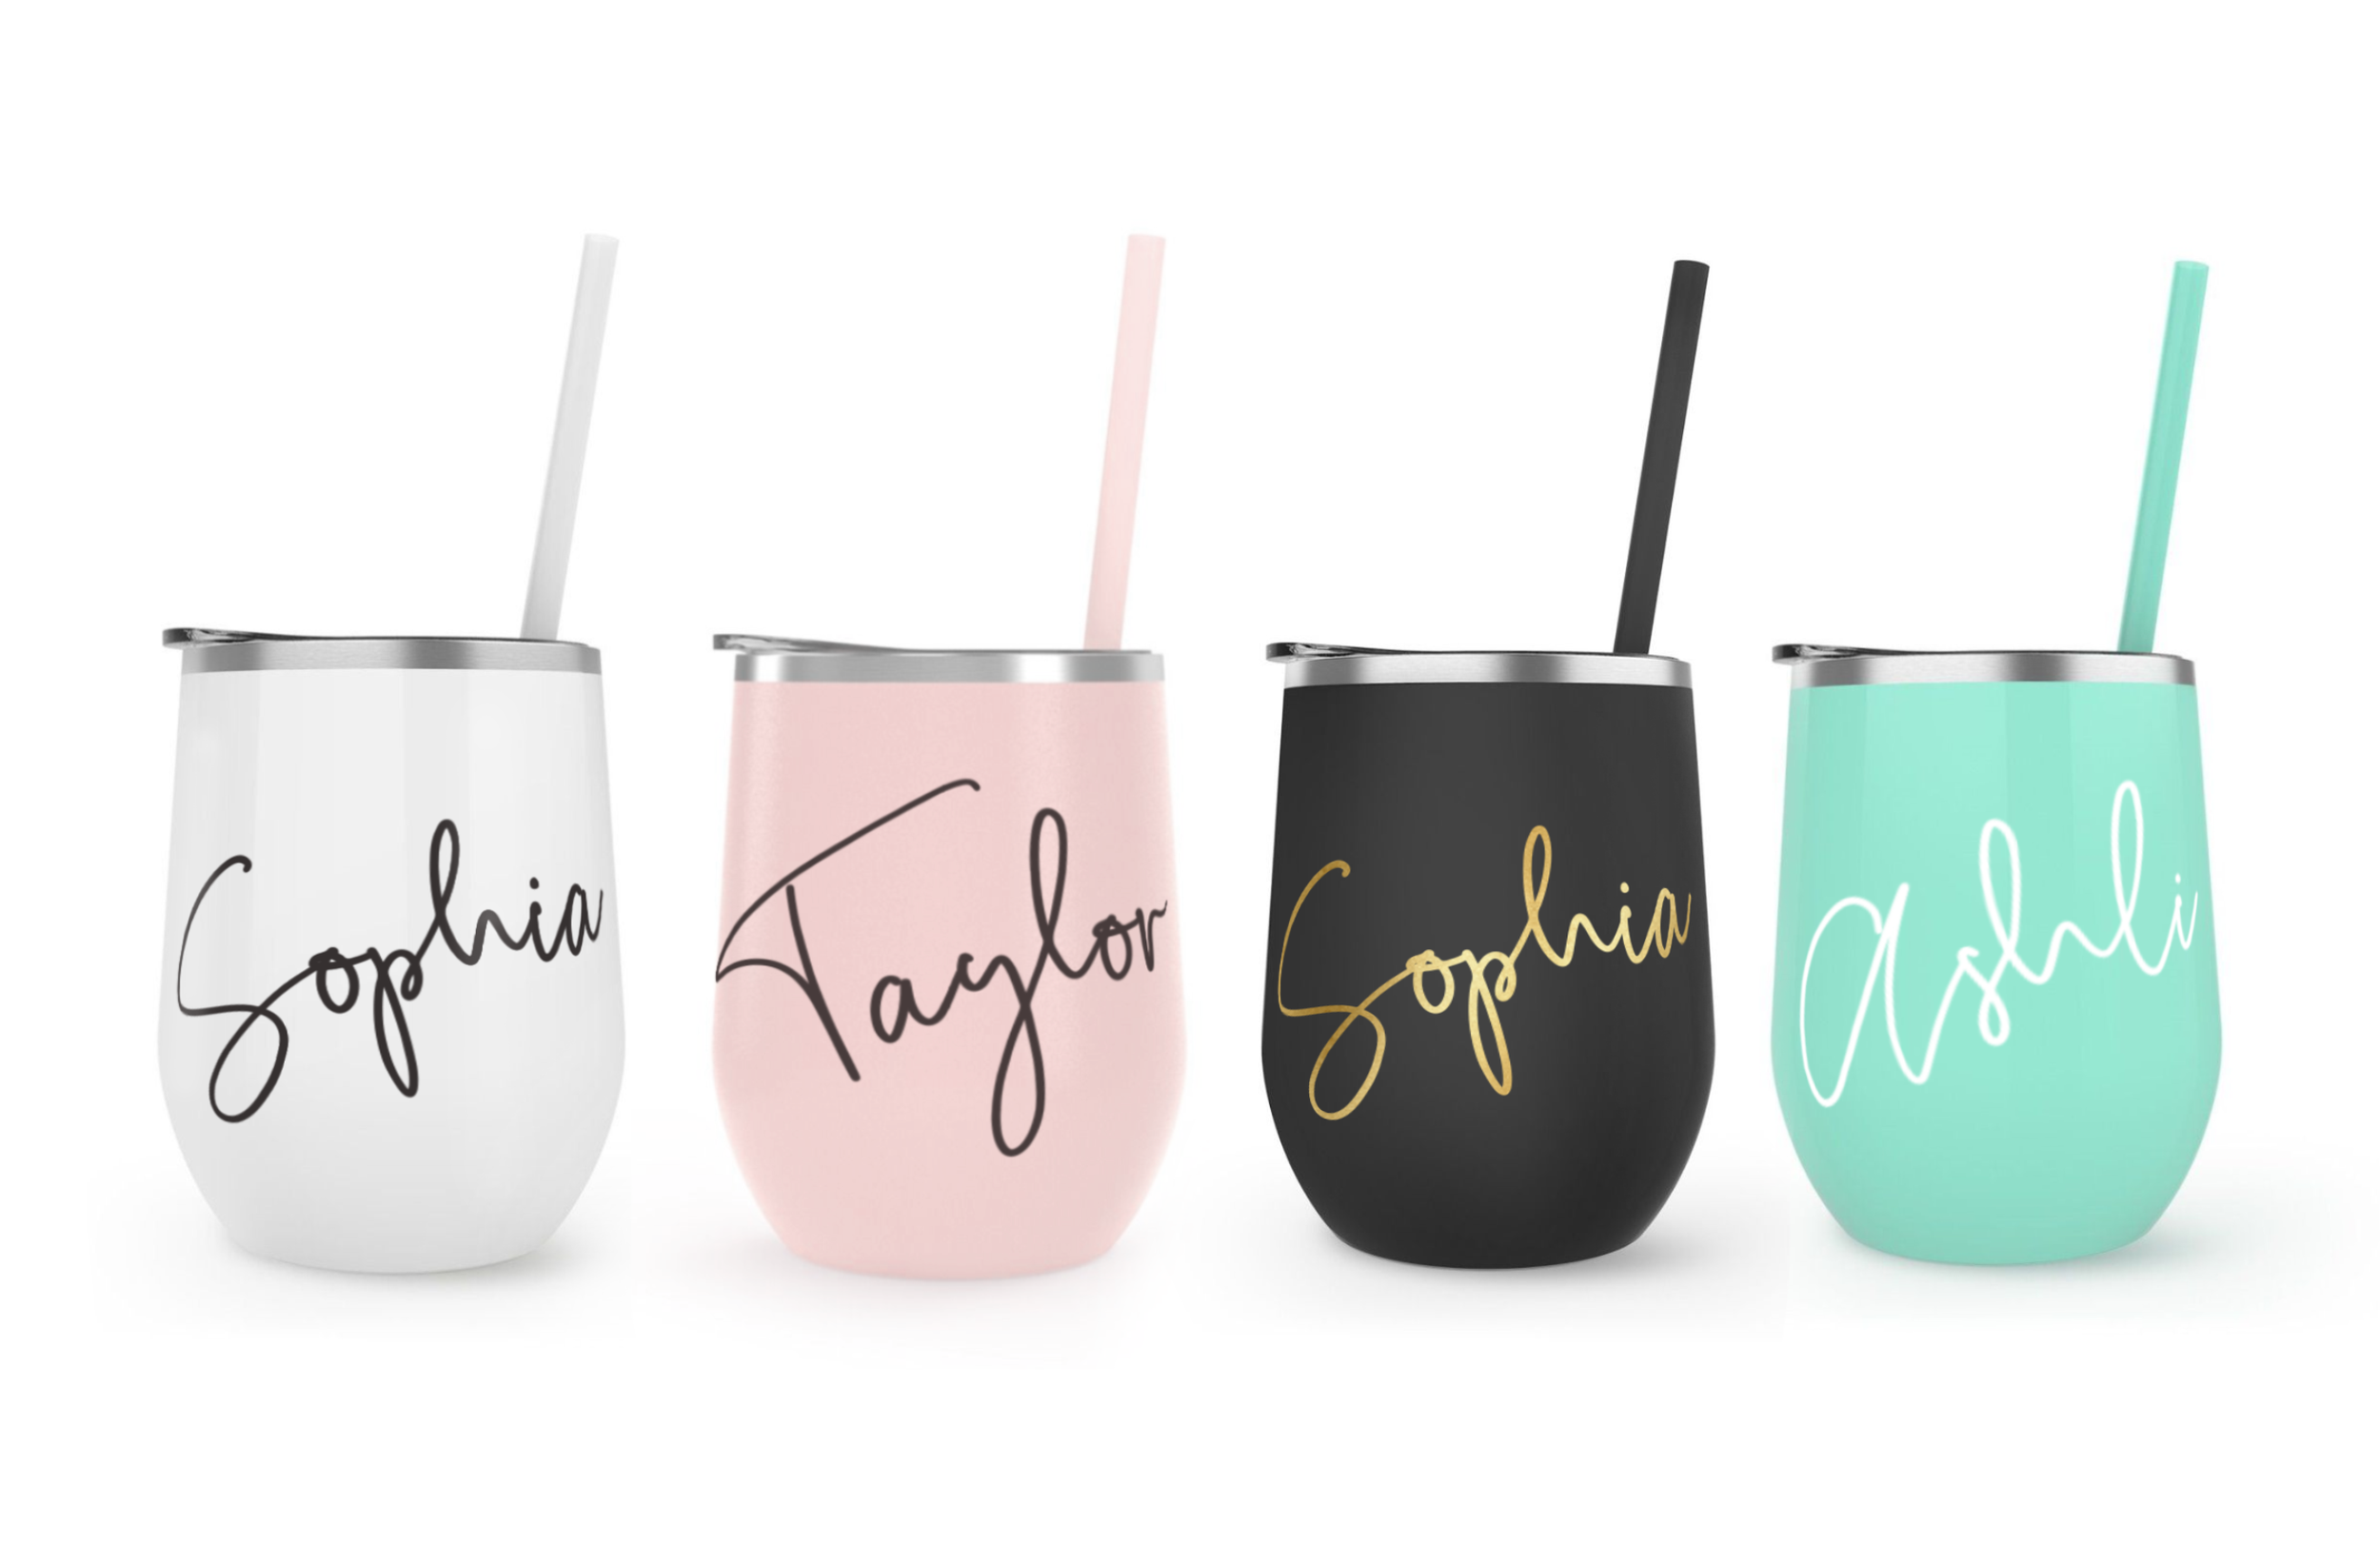 Made just for you Create your own tumbler Wine Custom Made Tumbler-Personalized Tumbler Pick your own colors Gifts Birthday Gift